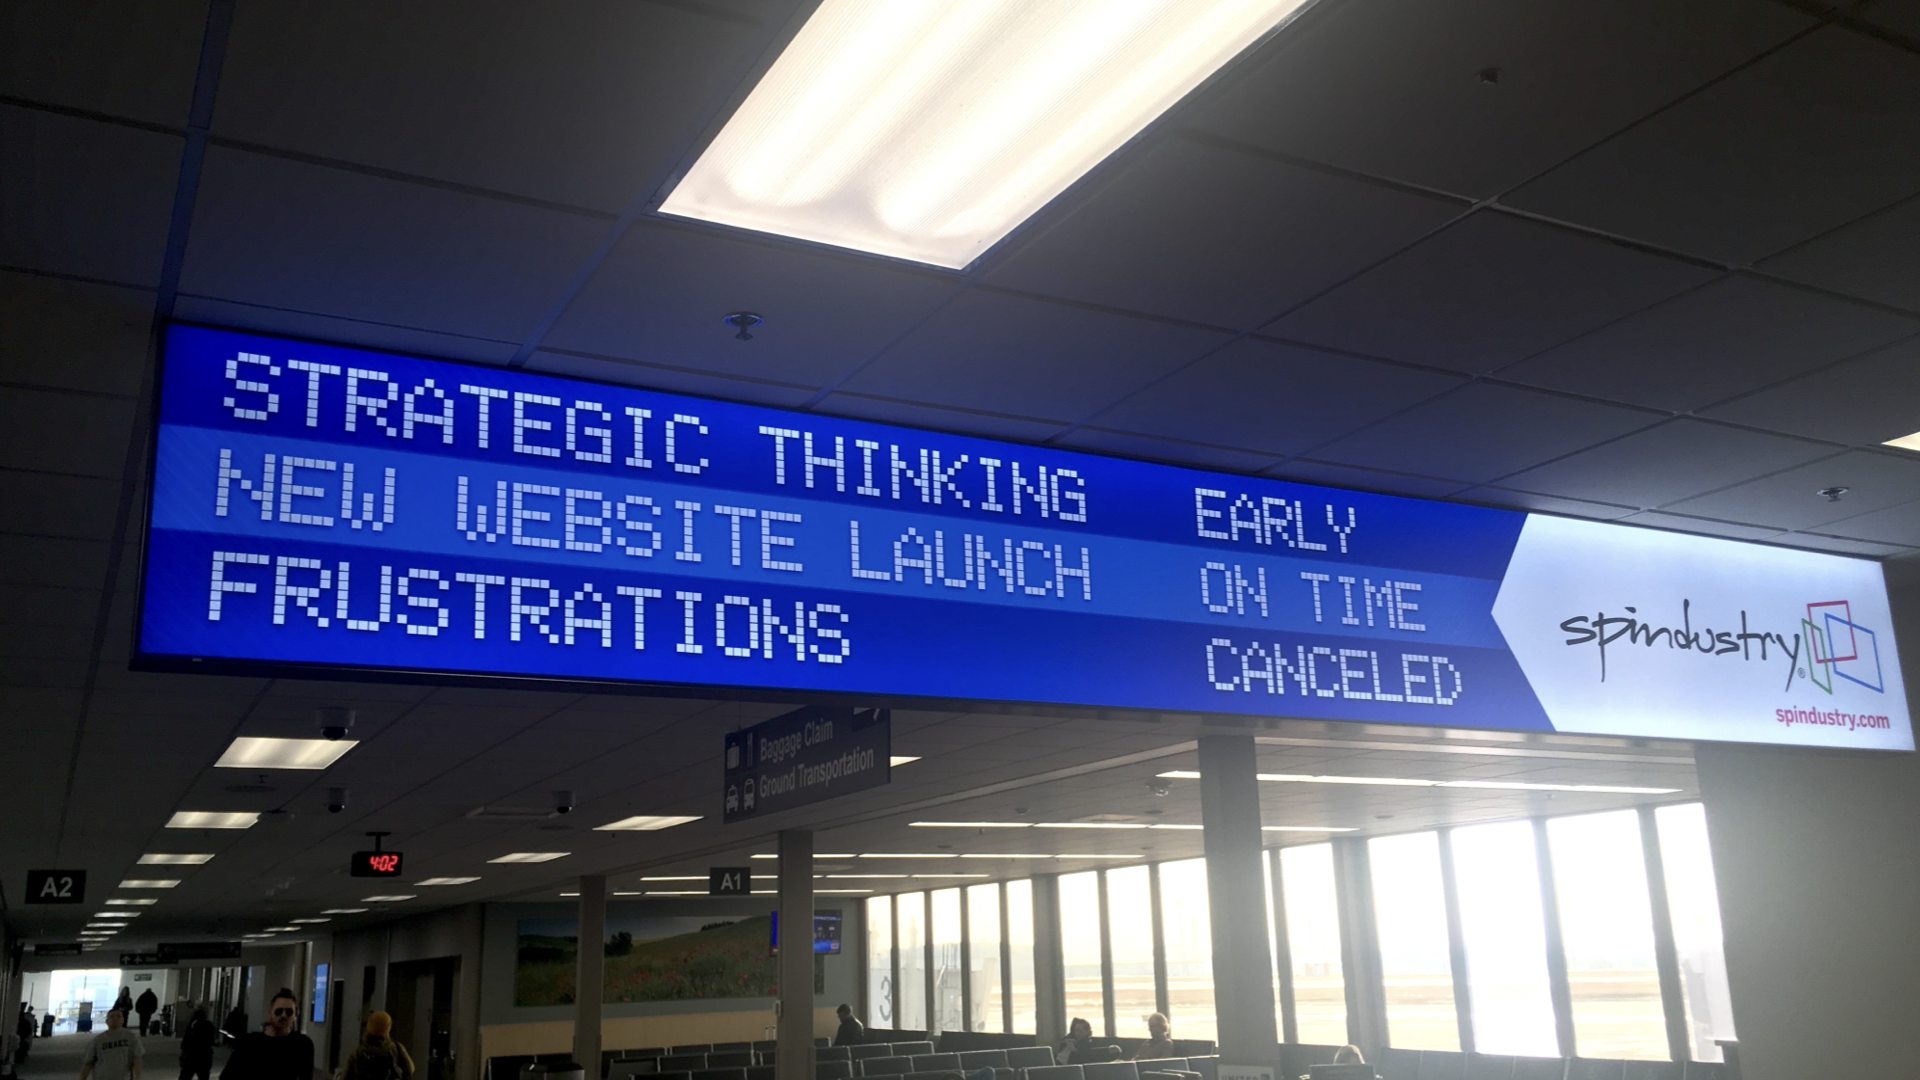 Advertisement in an airport for a company called Spindustry, which mimics a flight arrival/departure display. It includes the phrase "New website launch" marked "On Time"